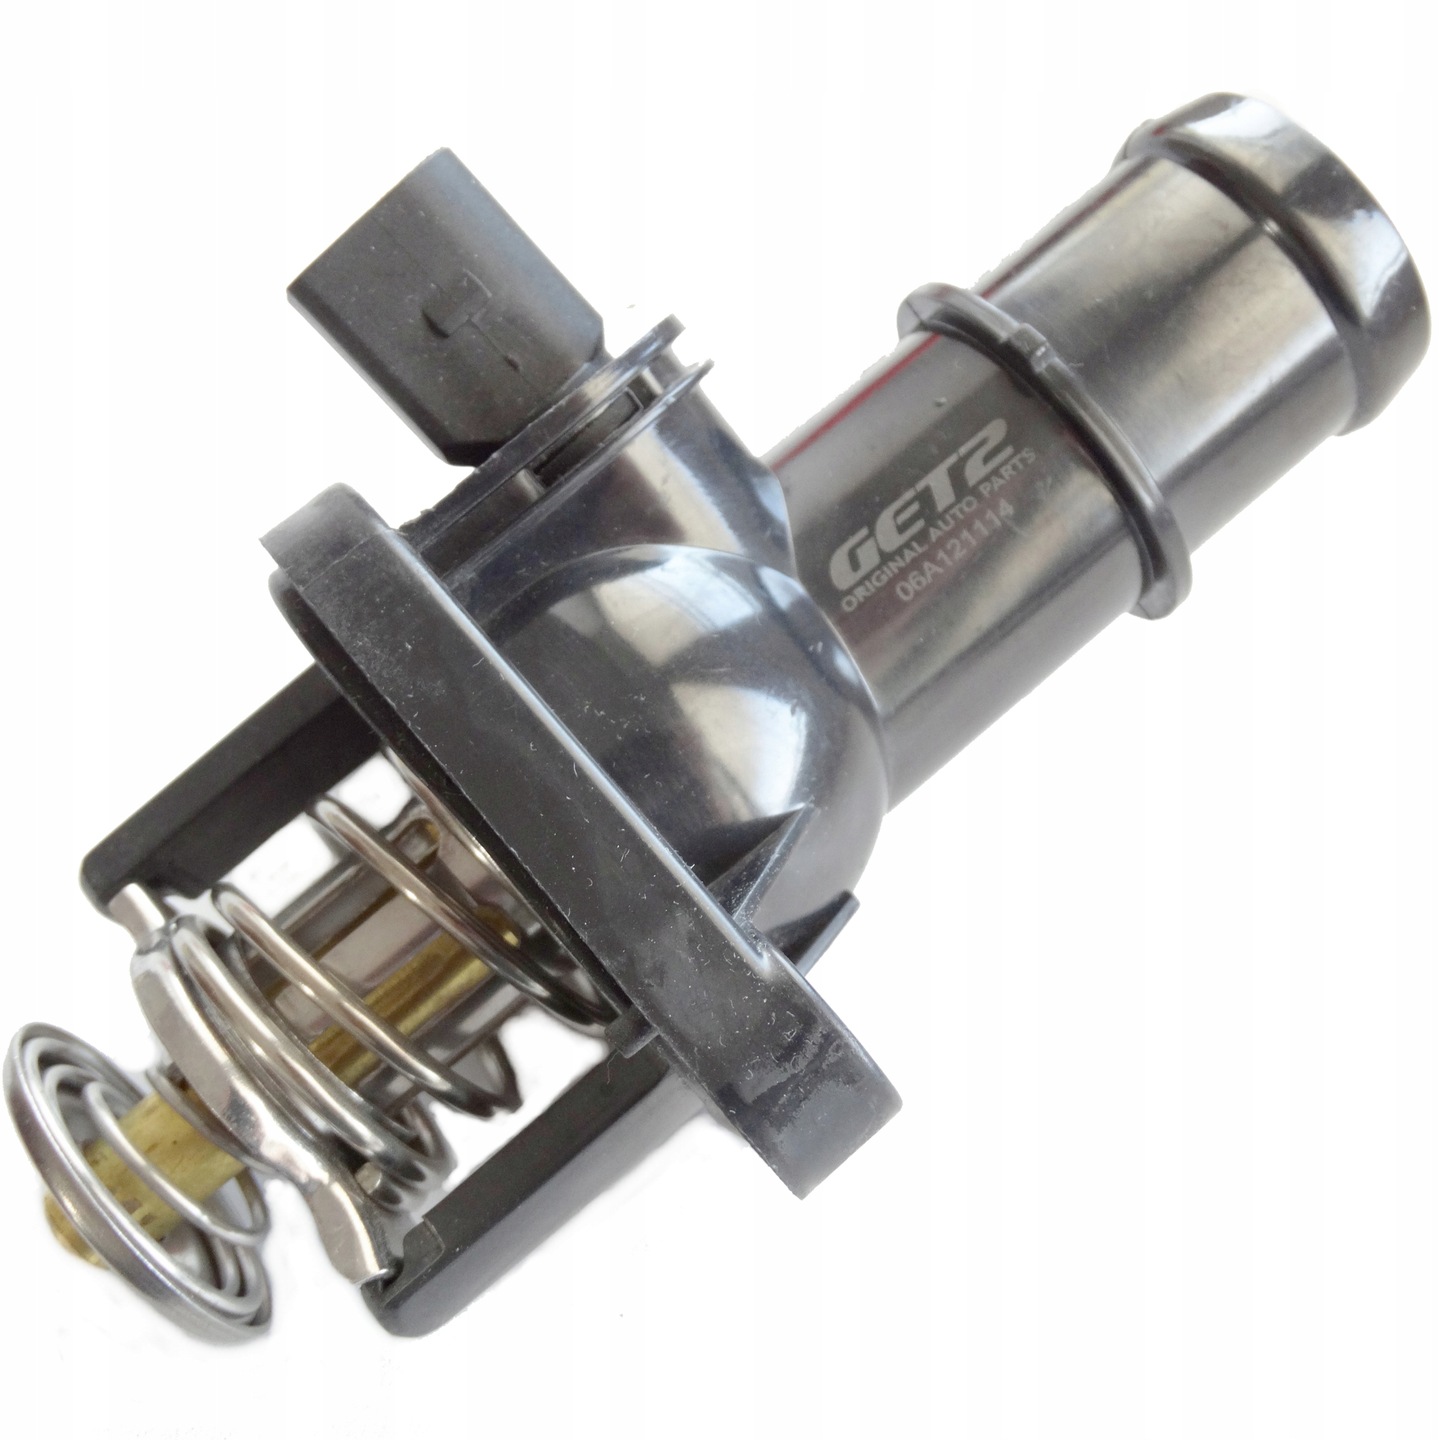 THERMOSTAT CASING A3 1.6 FOR 96-03 101 KM